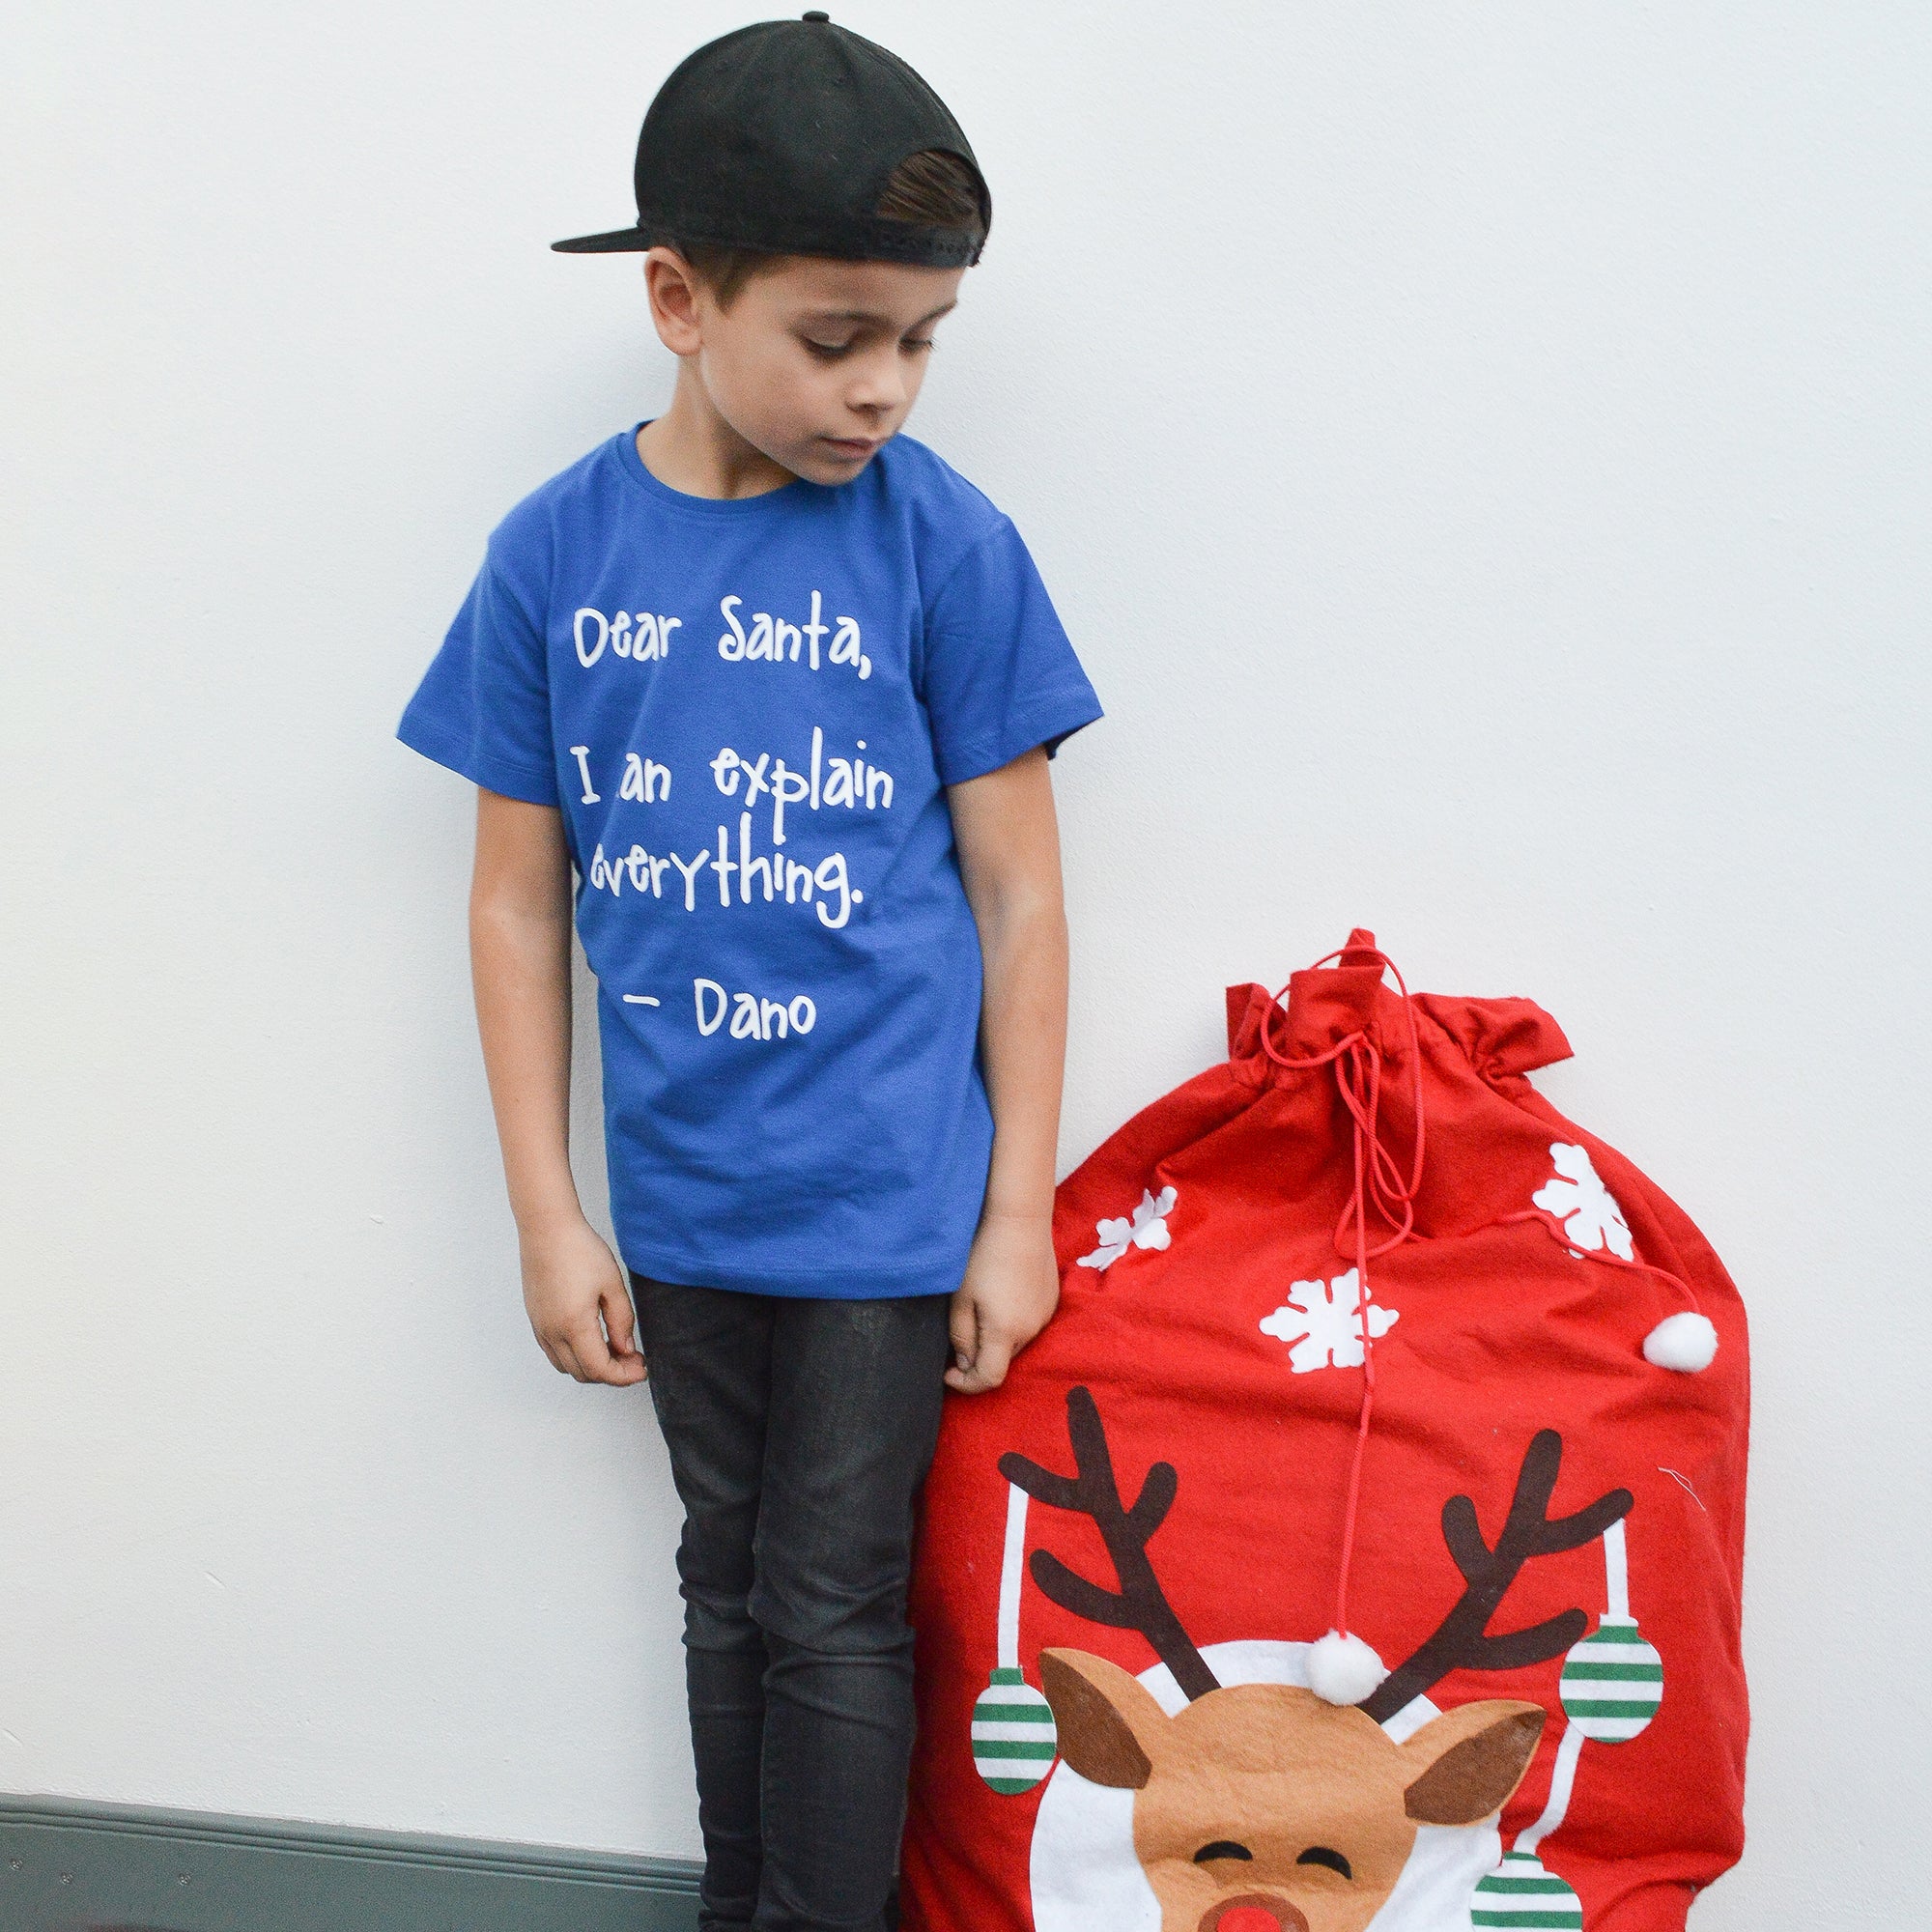 Boy with black cap and blue shirt with 'Santa, I can explain everything' shirt by KMLeon, looking at red christmas bag.